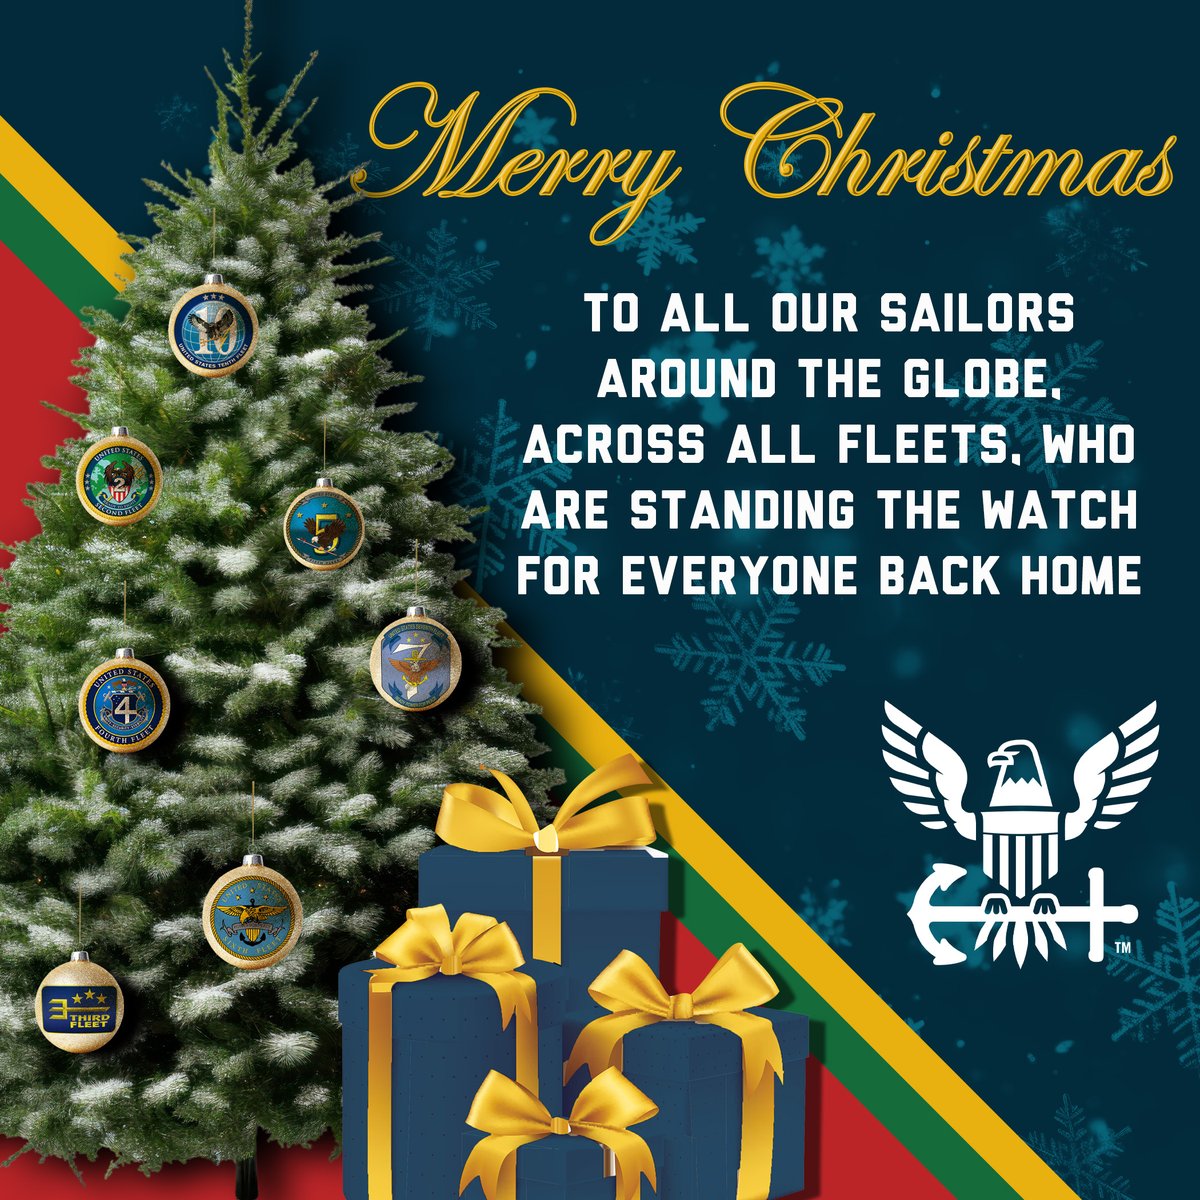 Anchors aweigh into the holiday season! 🎄⚓ Wishing you a Merry Christmas & smooth seas from the United States Navy! Big shoutout to all our Sailors around the globe who are making sure the seas and skies are #freeandopen for Santa to make his rounds! #USNavy #NauticalGreetings